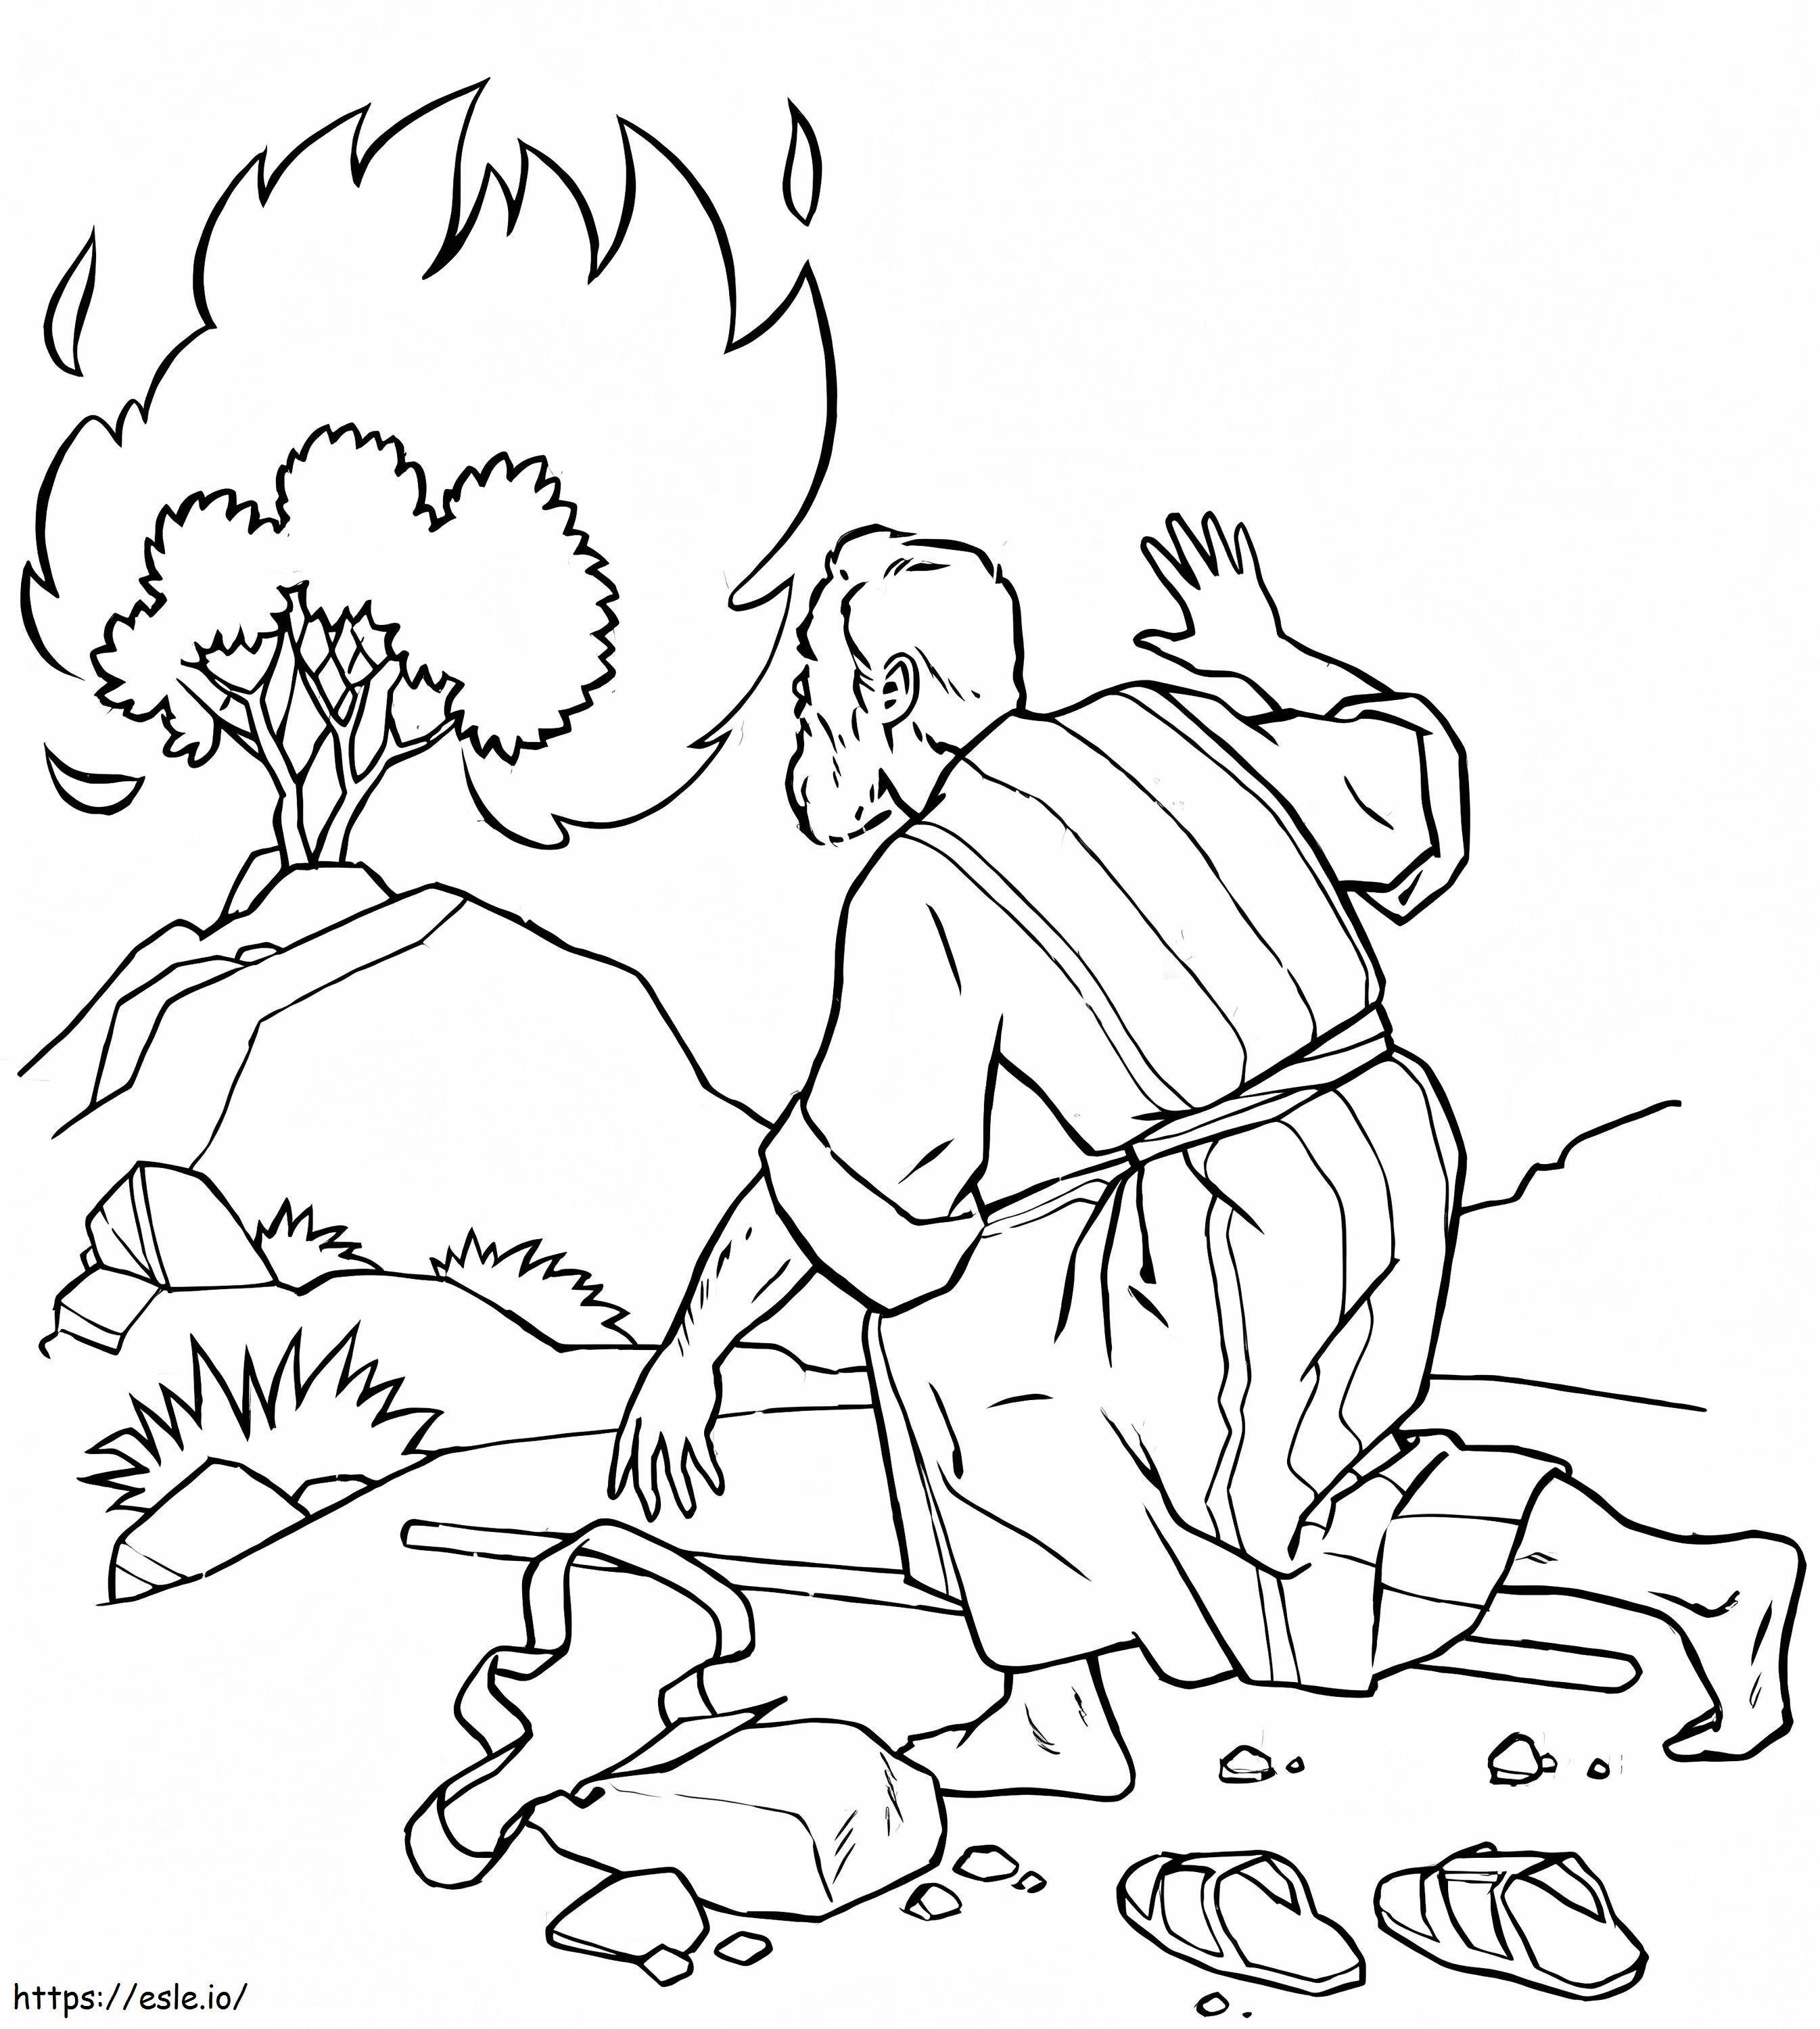 Printable Moses And The Burning Bush coloring page